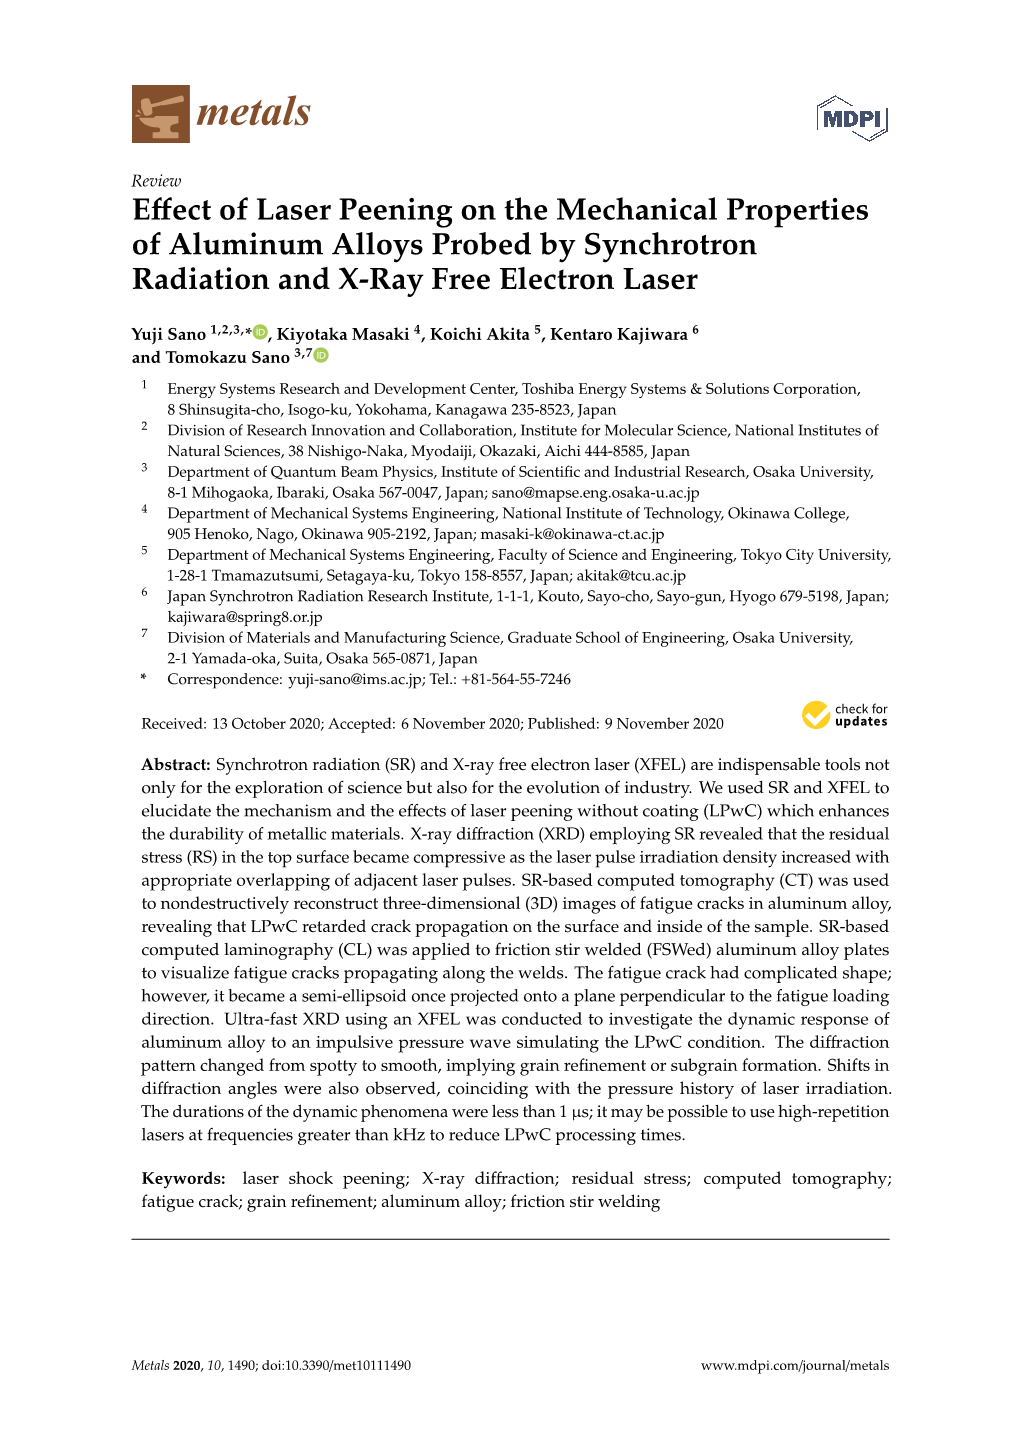 Effect of Laser Peening on the Mechanical Properties of Aluminum Alloys Probed by Synchrotron Radiation and X-Ray Free Electron